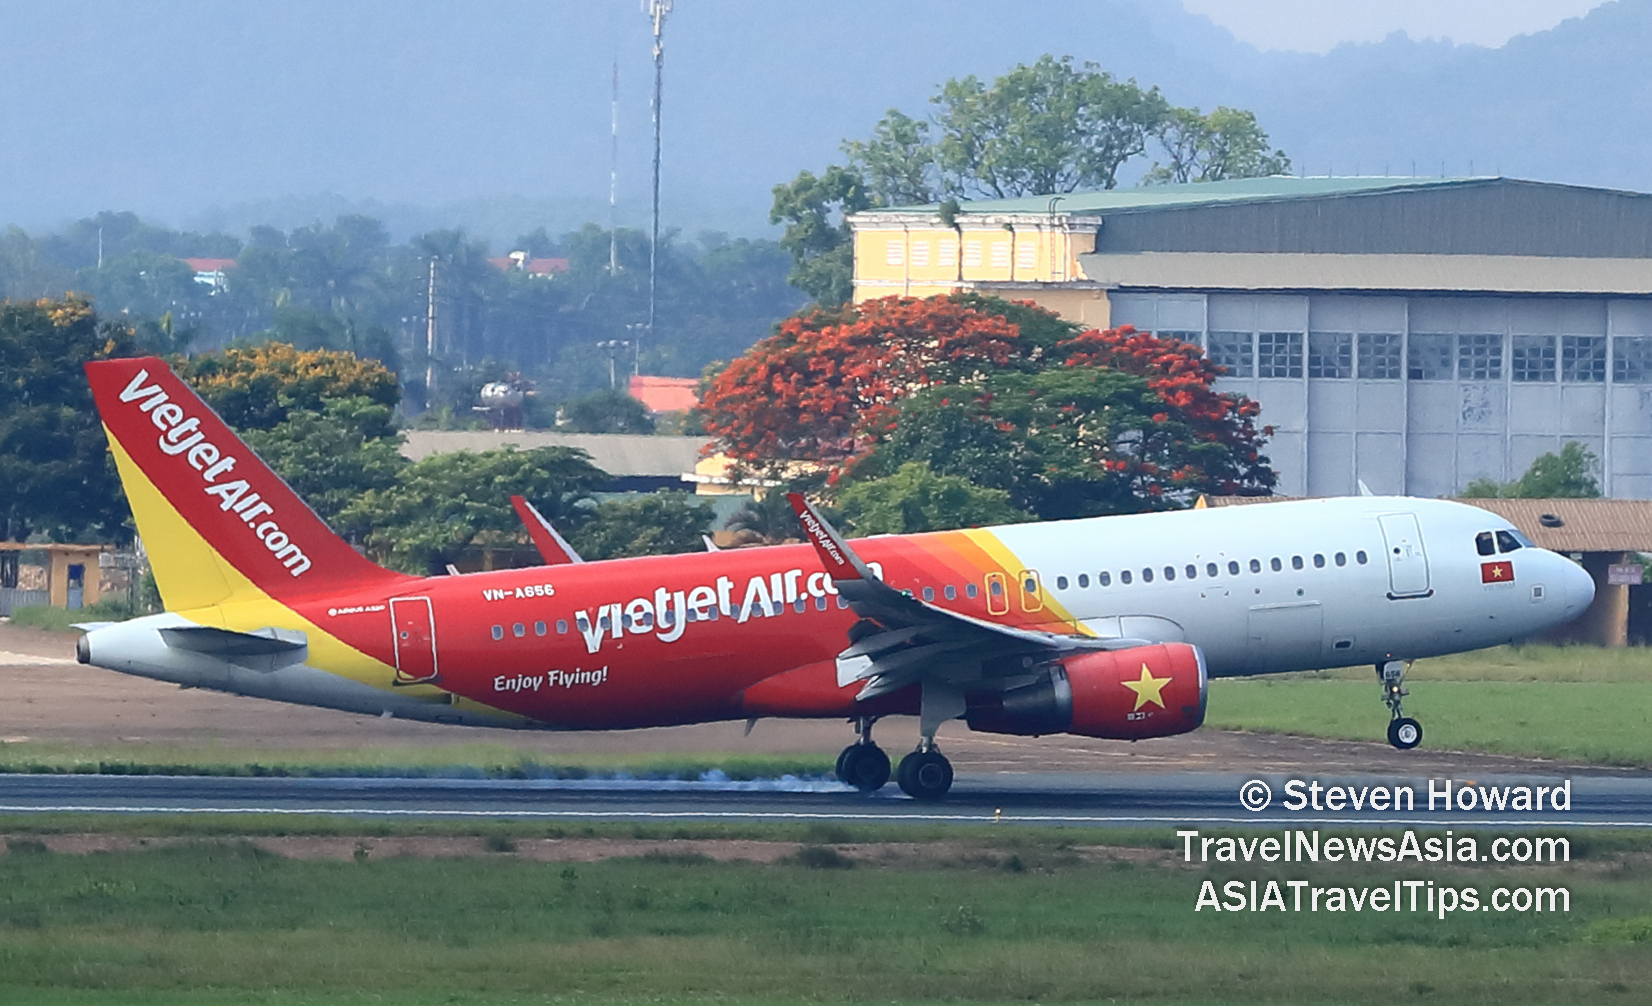 Vietjet A320 reg: VN-A656. Picture by Steven Howard of TravelNewsAsia.com Click to enlarge.